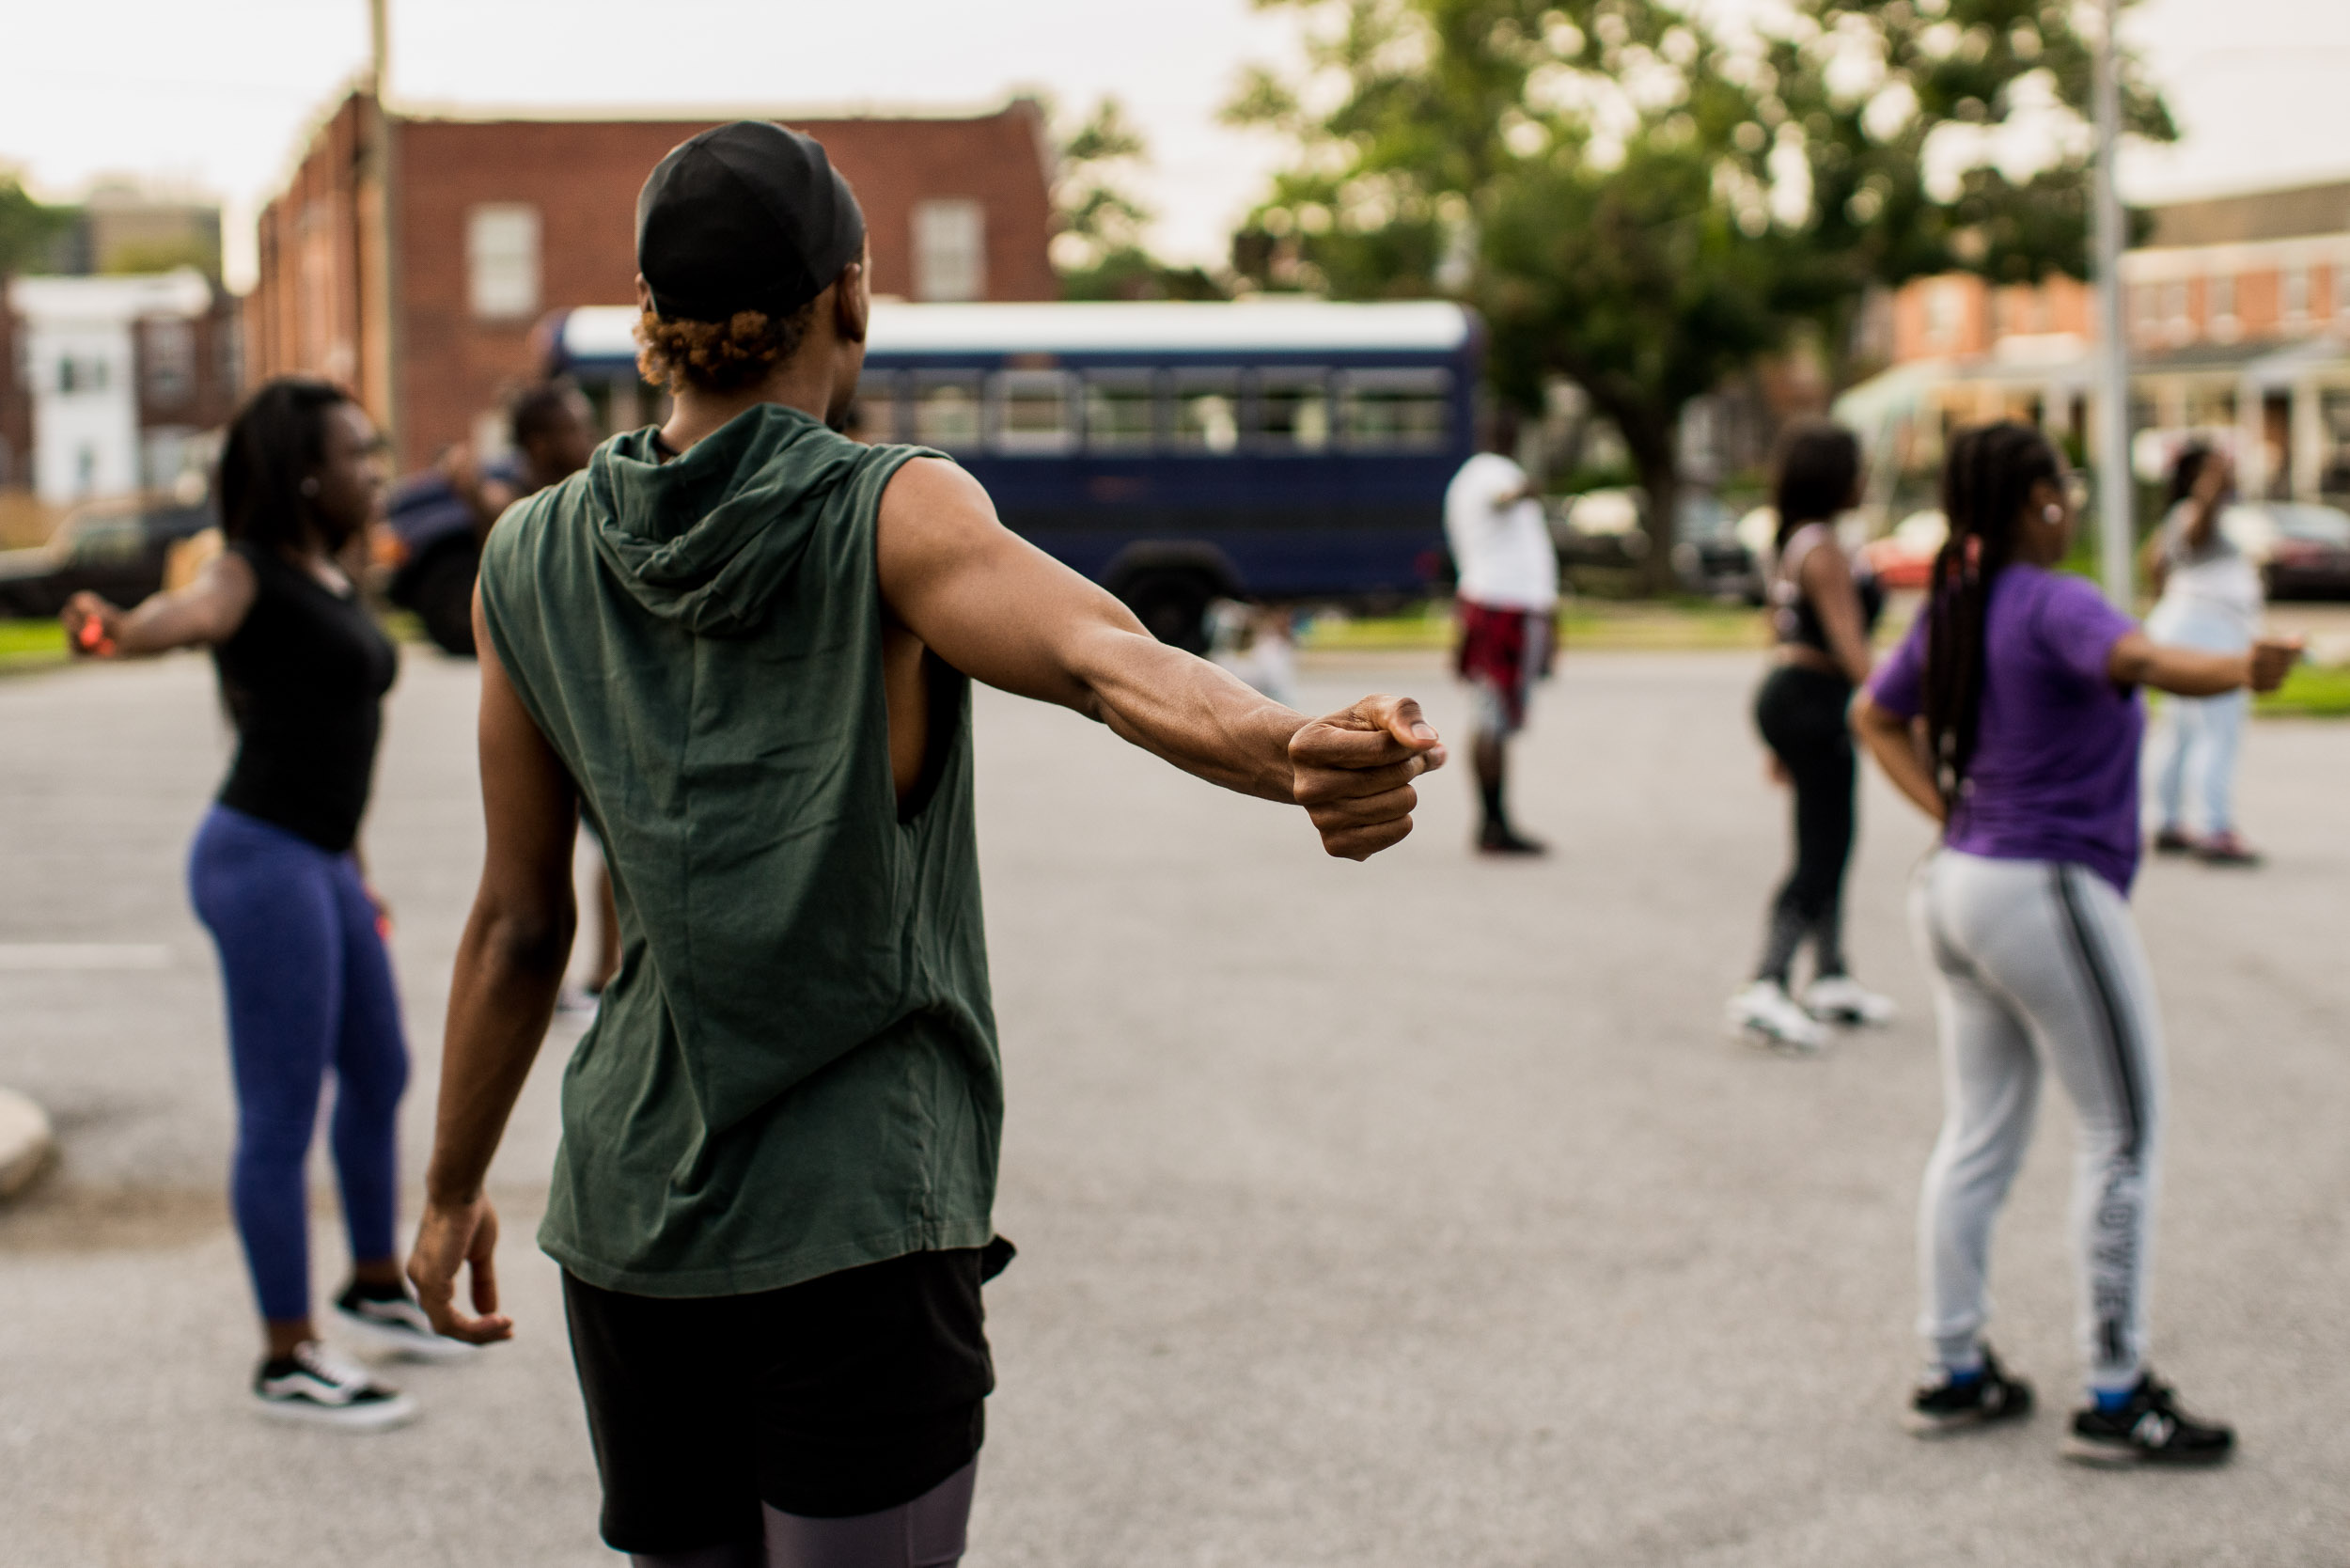 YOUTH URBAN BLACK CULTURE PHOTOGRAPHY ON HBCU STEP SQUAD MARCHING DANCE UNIT REPORTAGE PHOTOGRAPHER IN WASHINGTON DC NEW YORK LOS ANGELES 